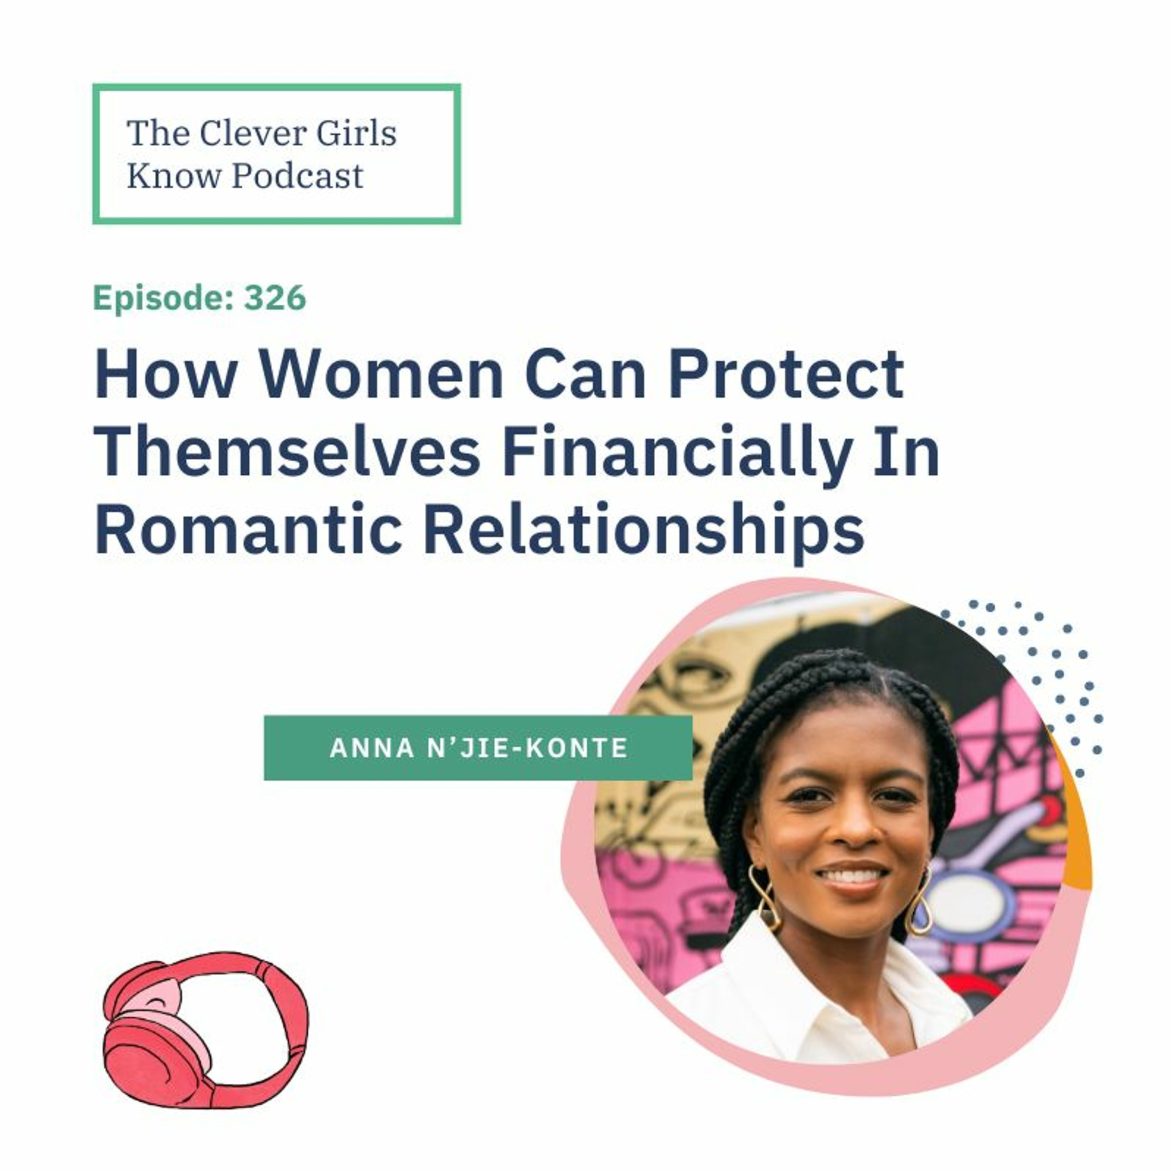 Black Podcasting - 326: How Women Can Protect Themselves Financially In Romantic Relationships With Anna N’Jie - Konte